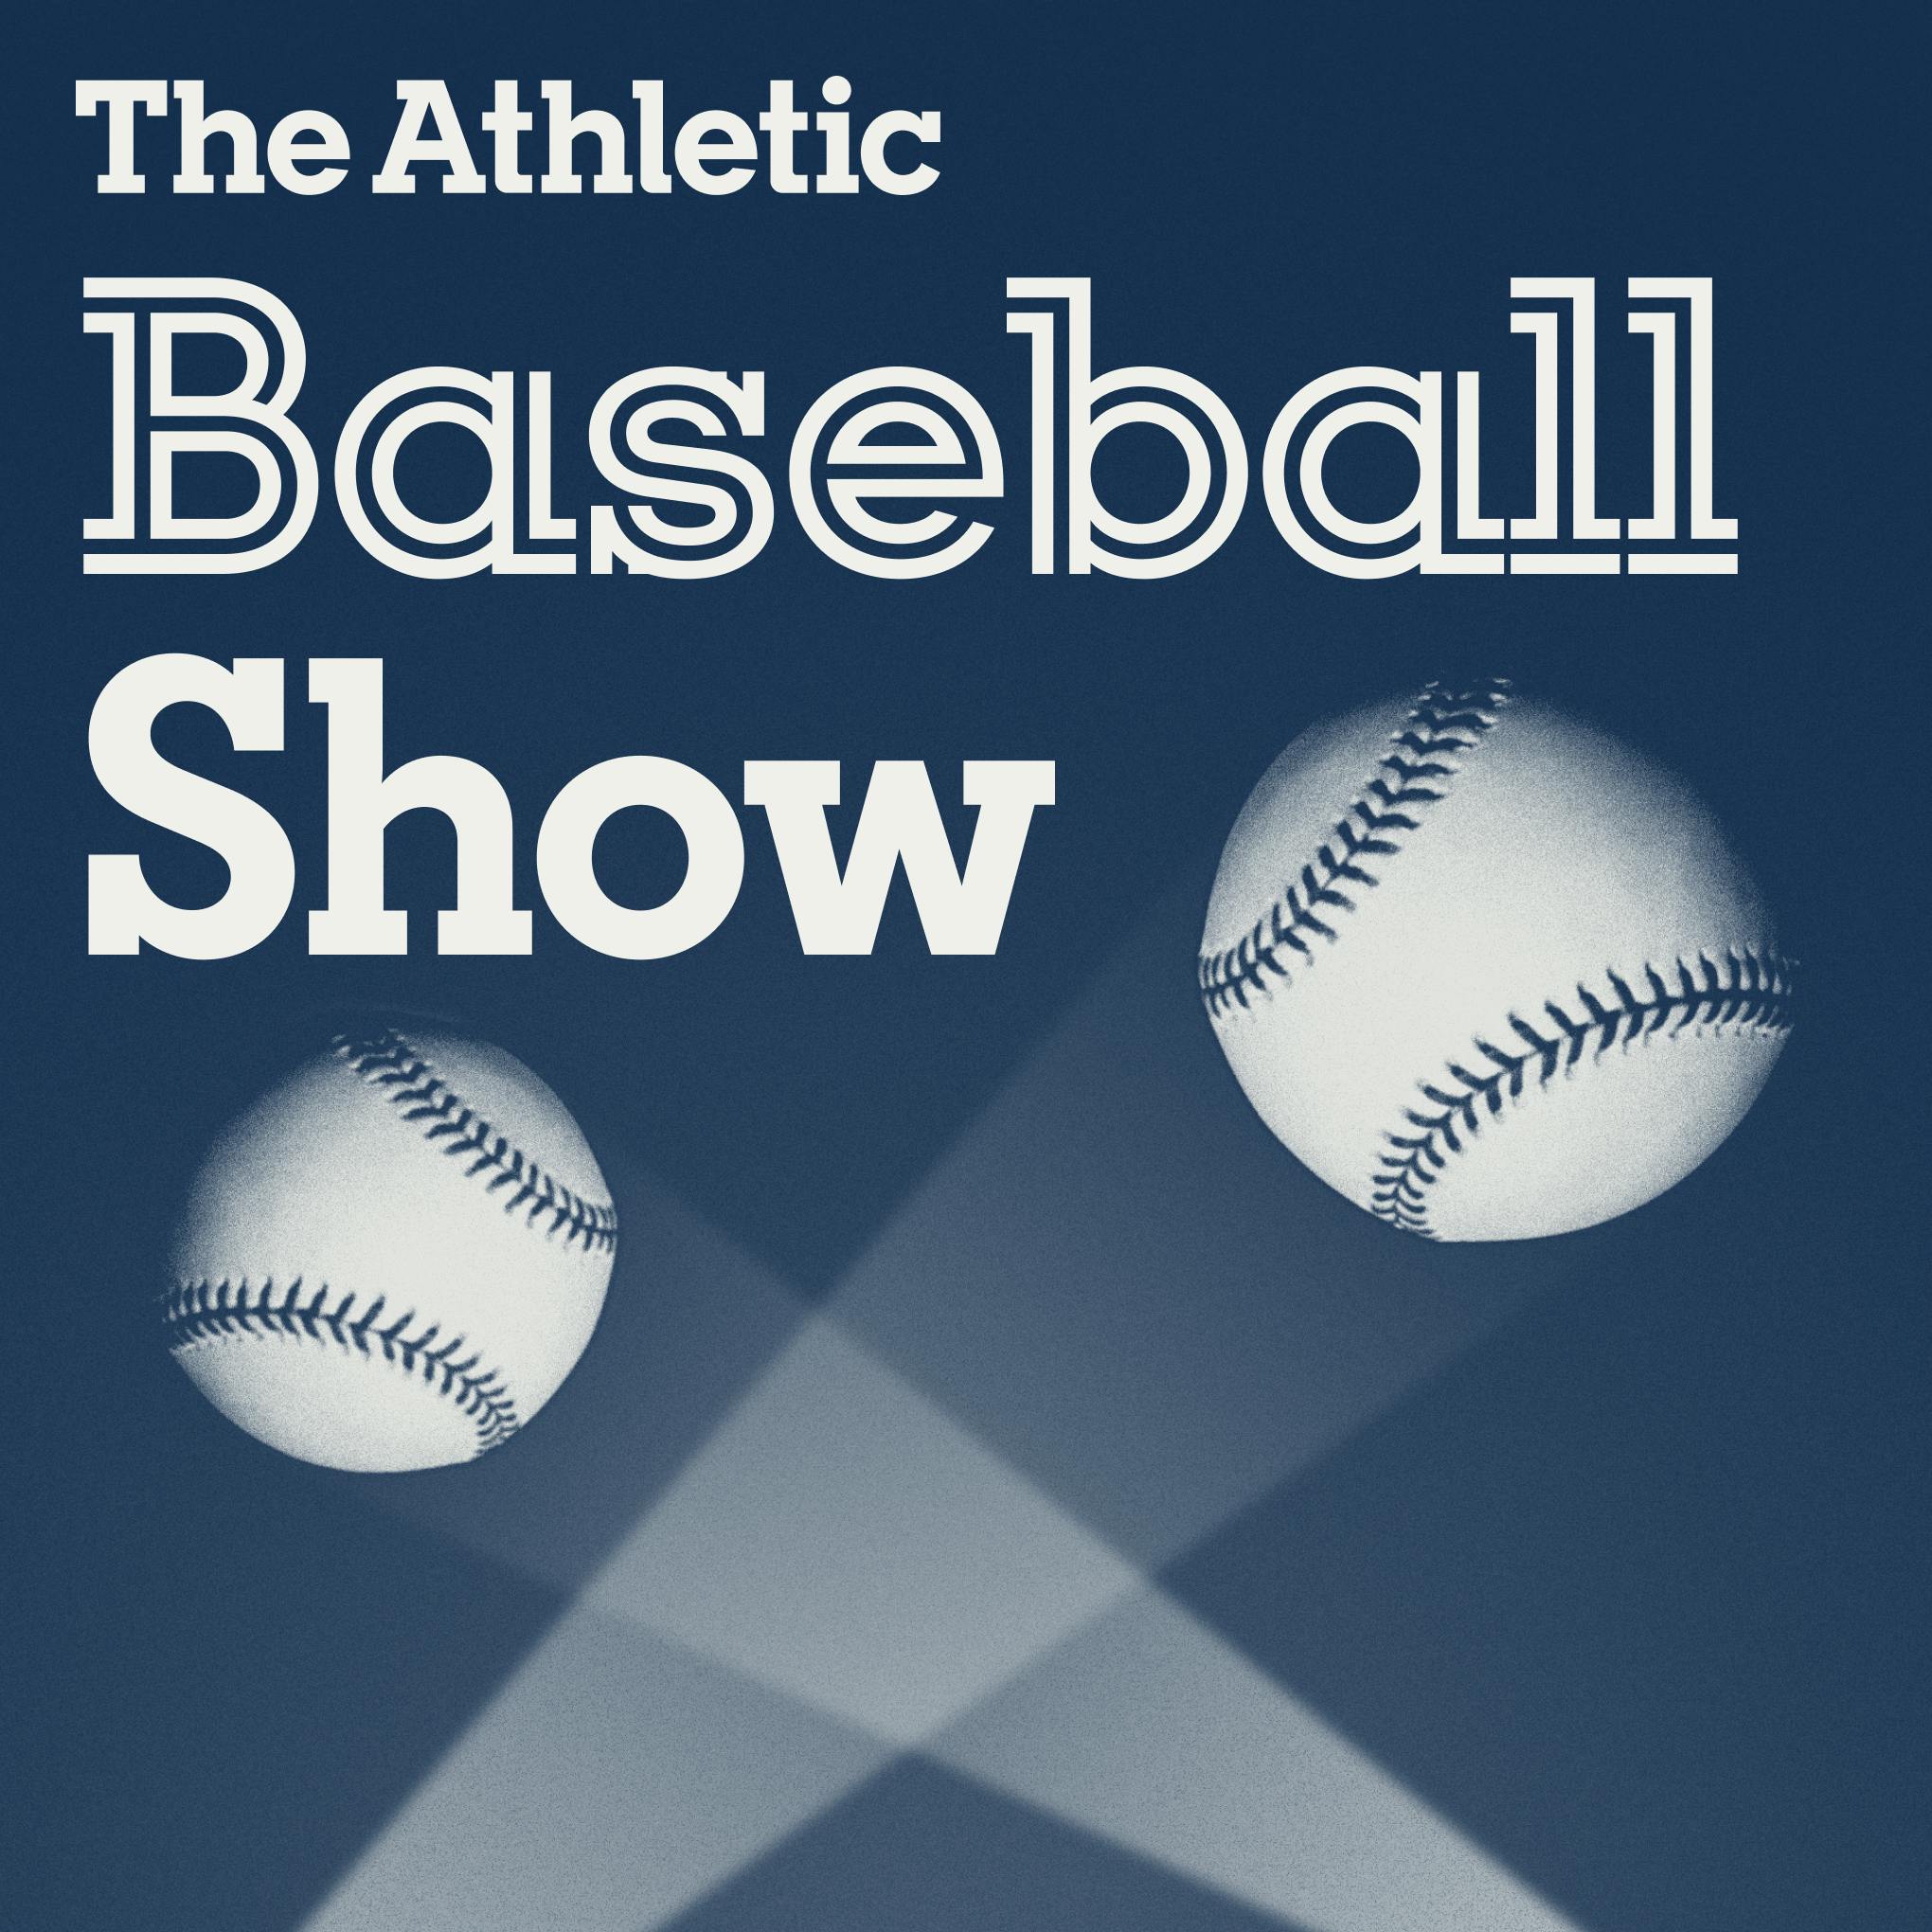 The Athletic Baseball Show podcast